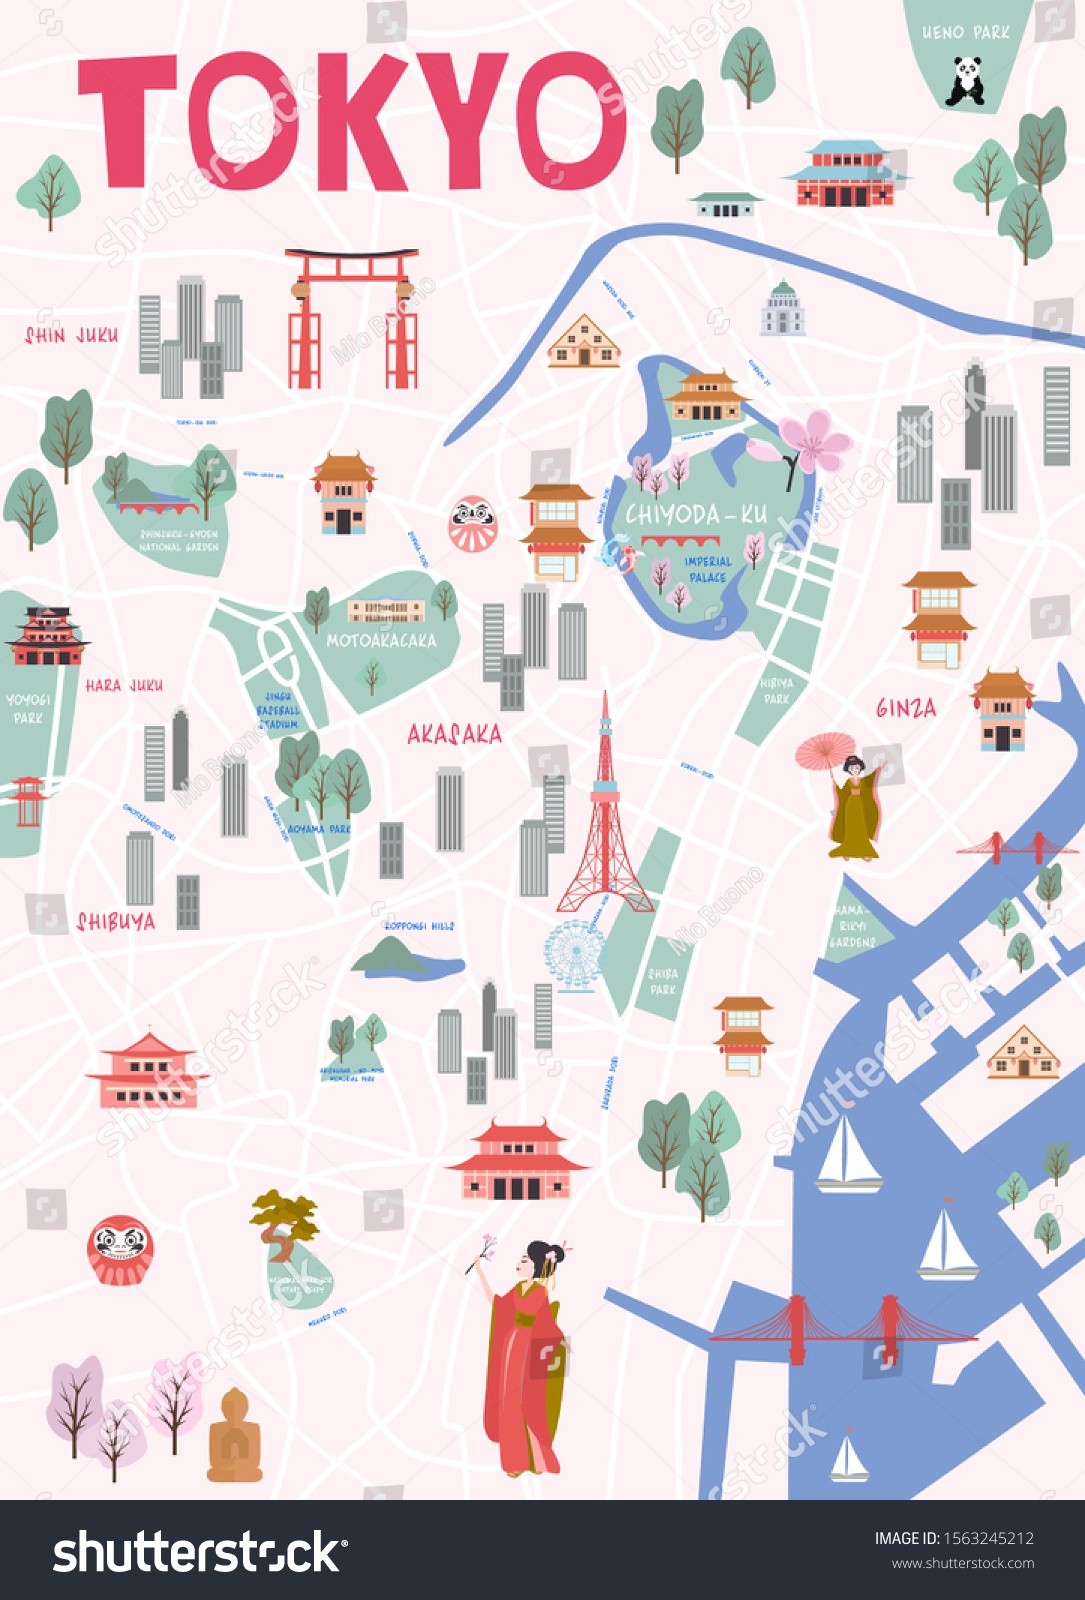 Guide Tokyo Illustrated City Map Main Stock Vector (Royalty Free ...